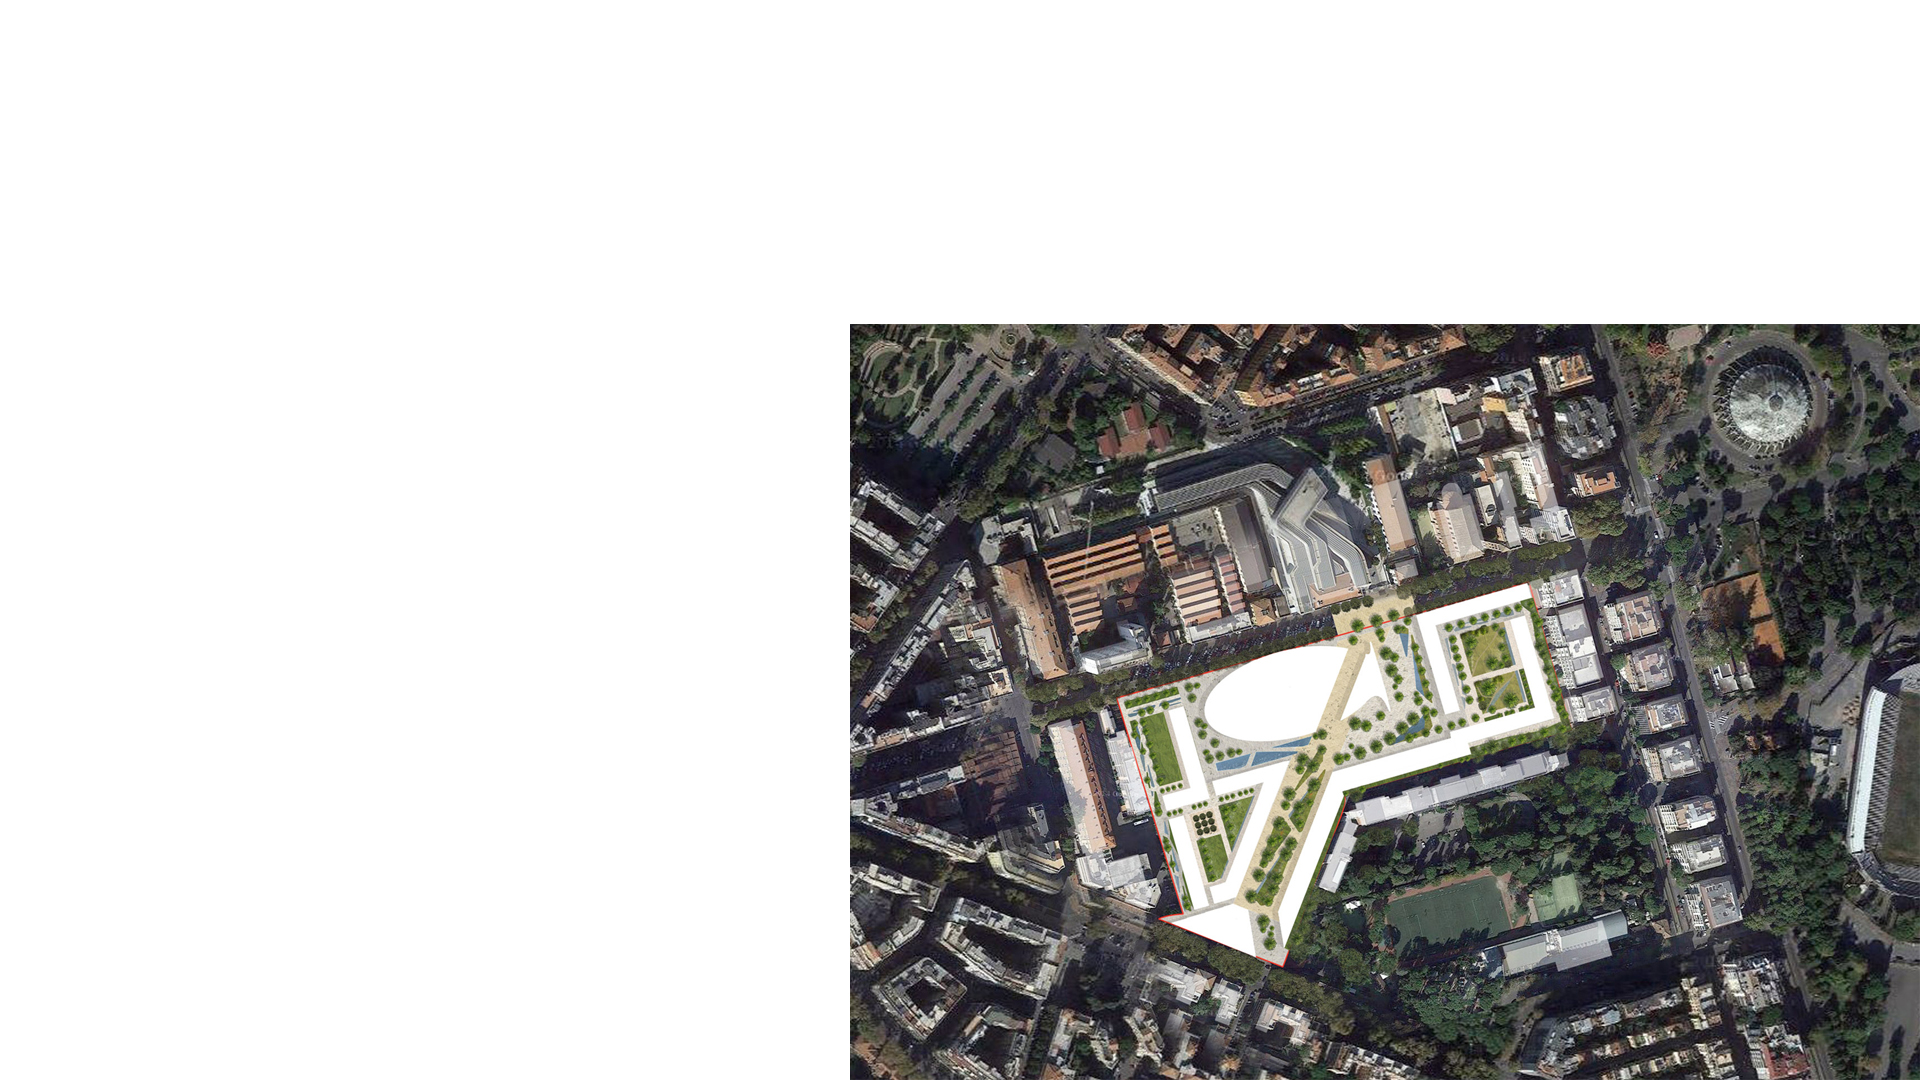 3D composite rendering of the Projetto Flaminio Masterplan Rome in the city context